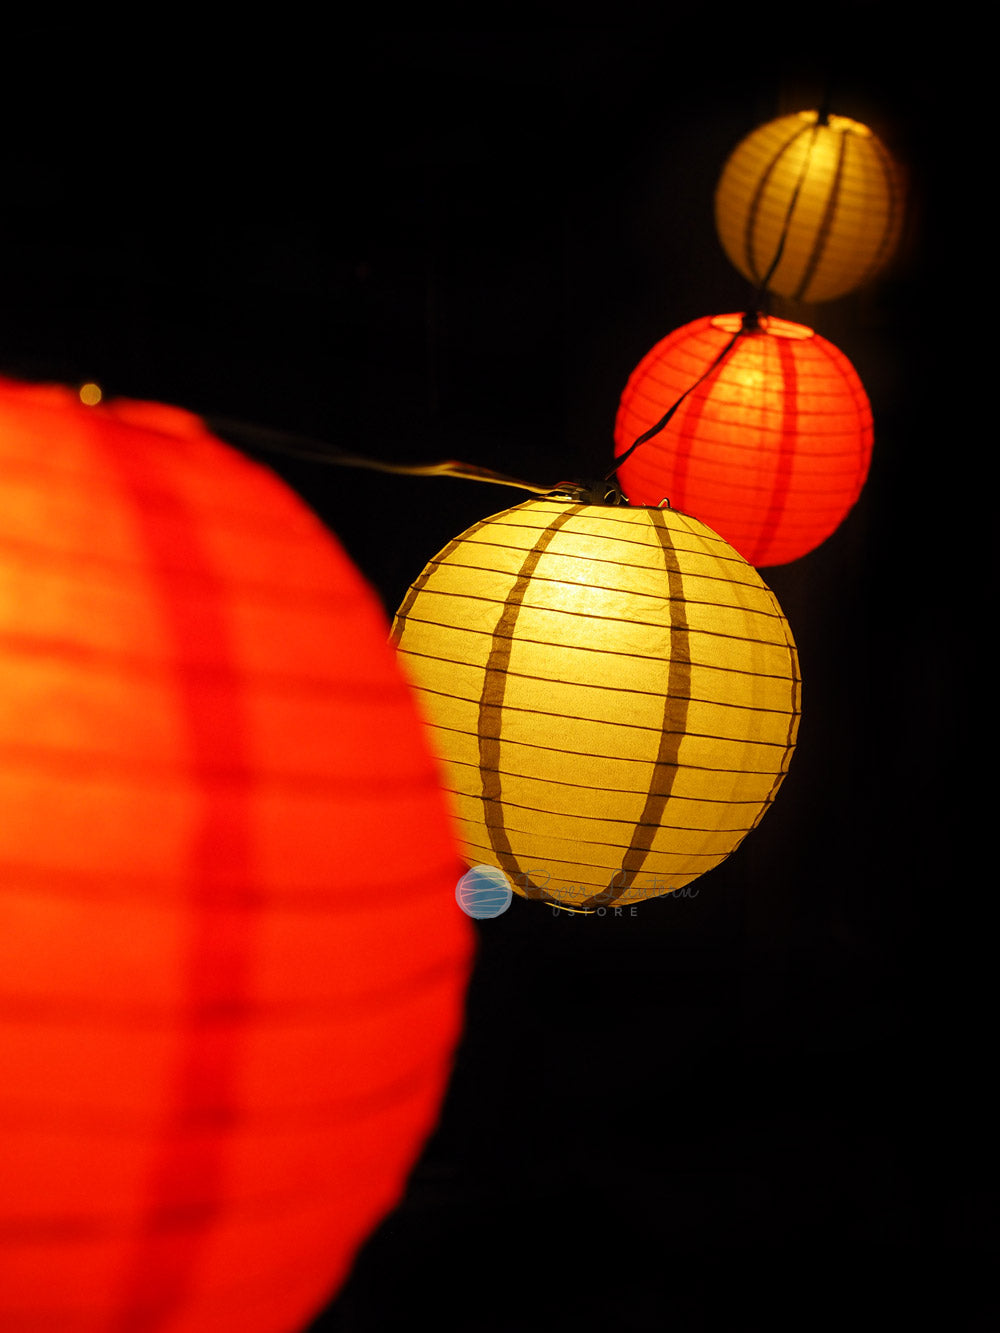 12&quot; Chinese New Year Red and Gold Paper Lantern String Light COMBO Kit (31 FT, EXPANDABLE, Black Cord) - PaperLanternStore.com - Paper Lanterns, Decor, Party Lights &amp; More